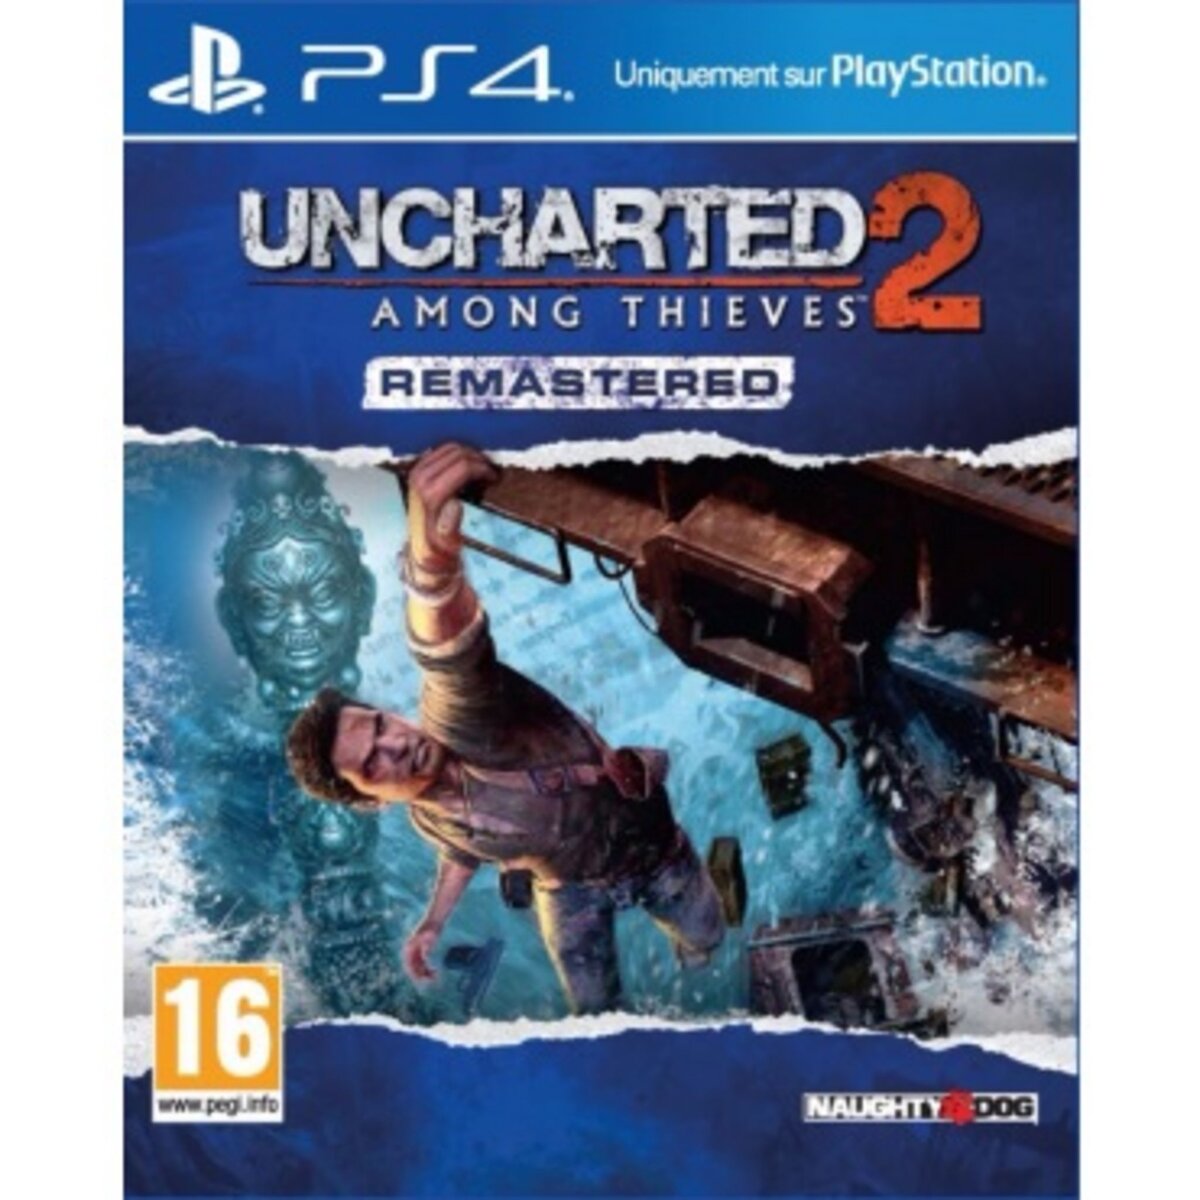 Uncharted 2 : Among Thieves - Remastered PS4